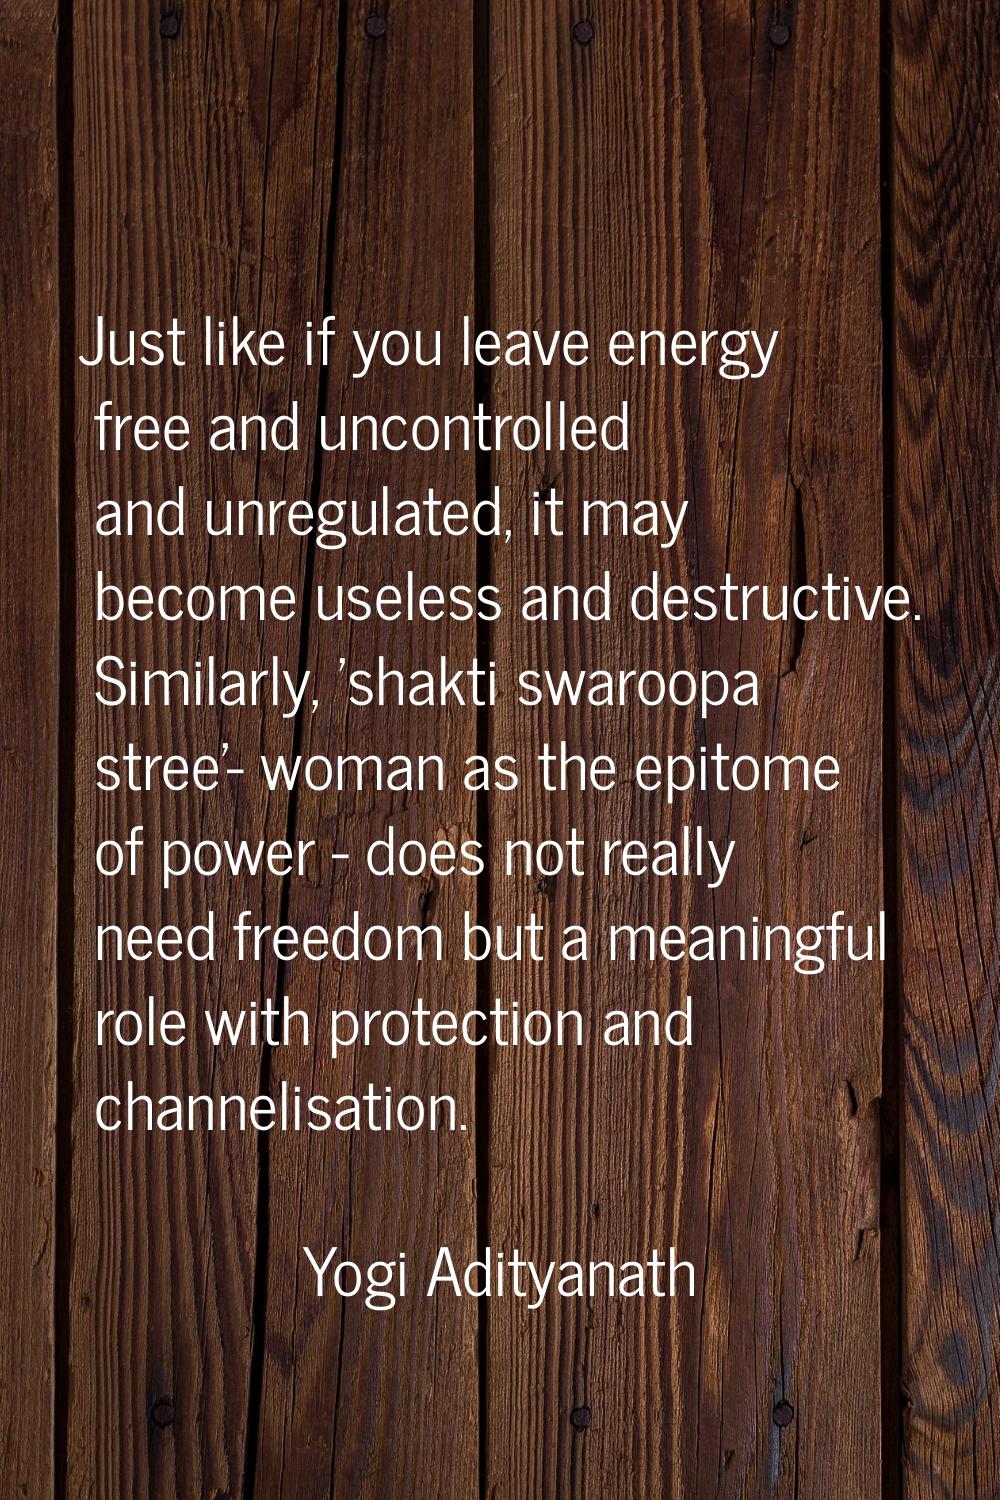 Just like if you leave energy free and uncontrolled and unregulated, it may become useless and dest